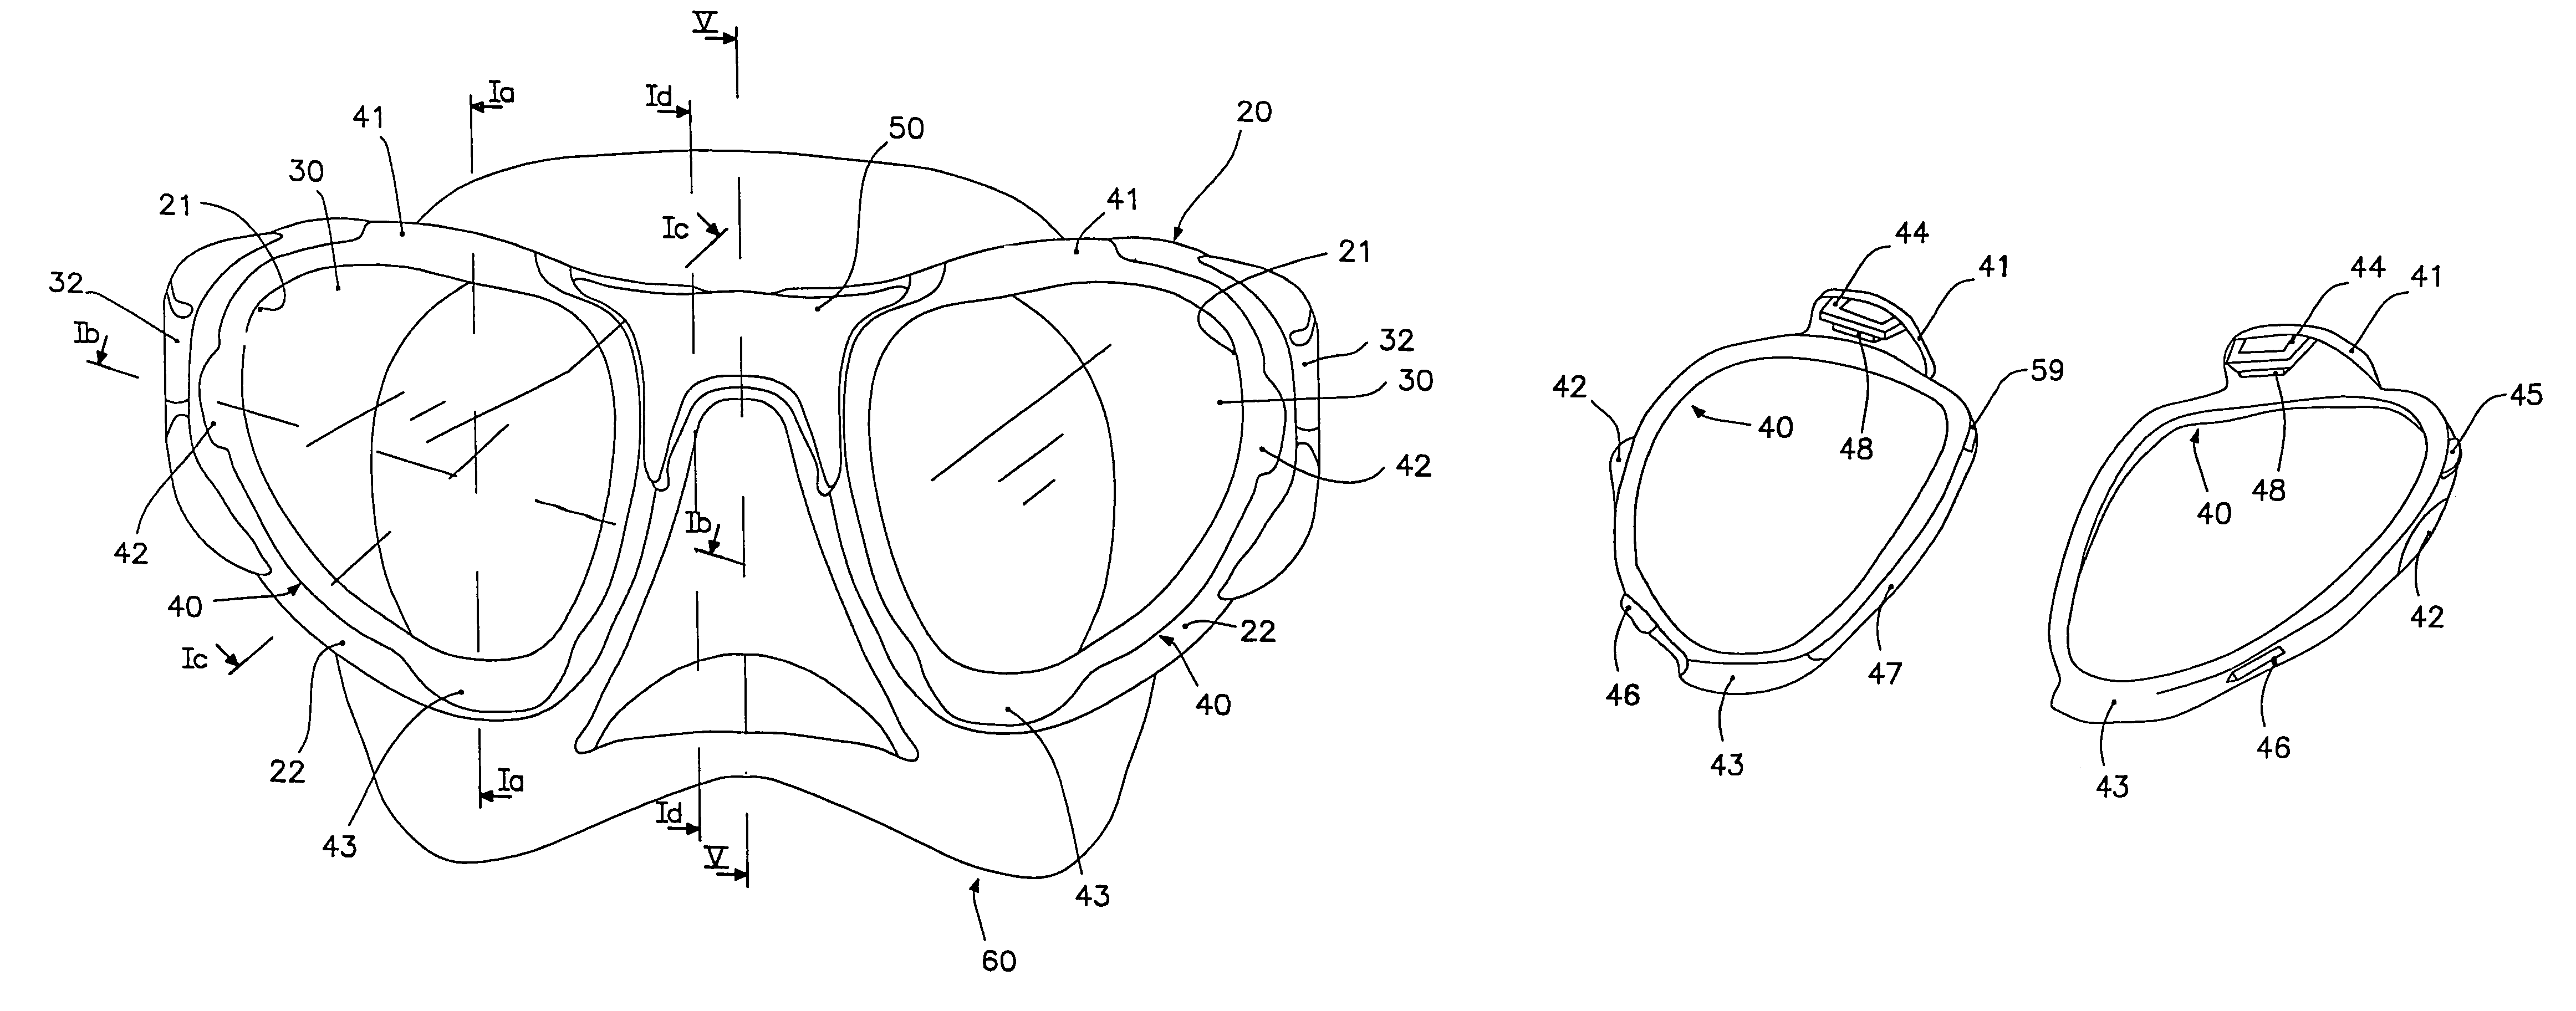 Scuba diving mask with corrective lenses